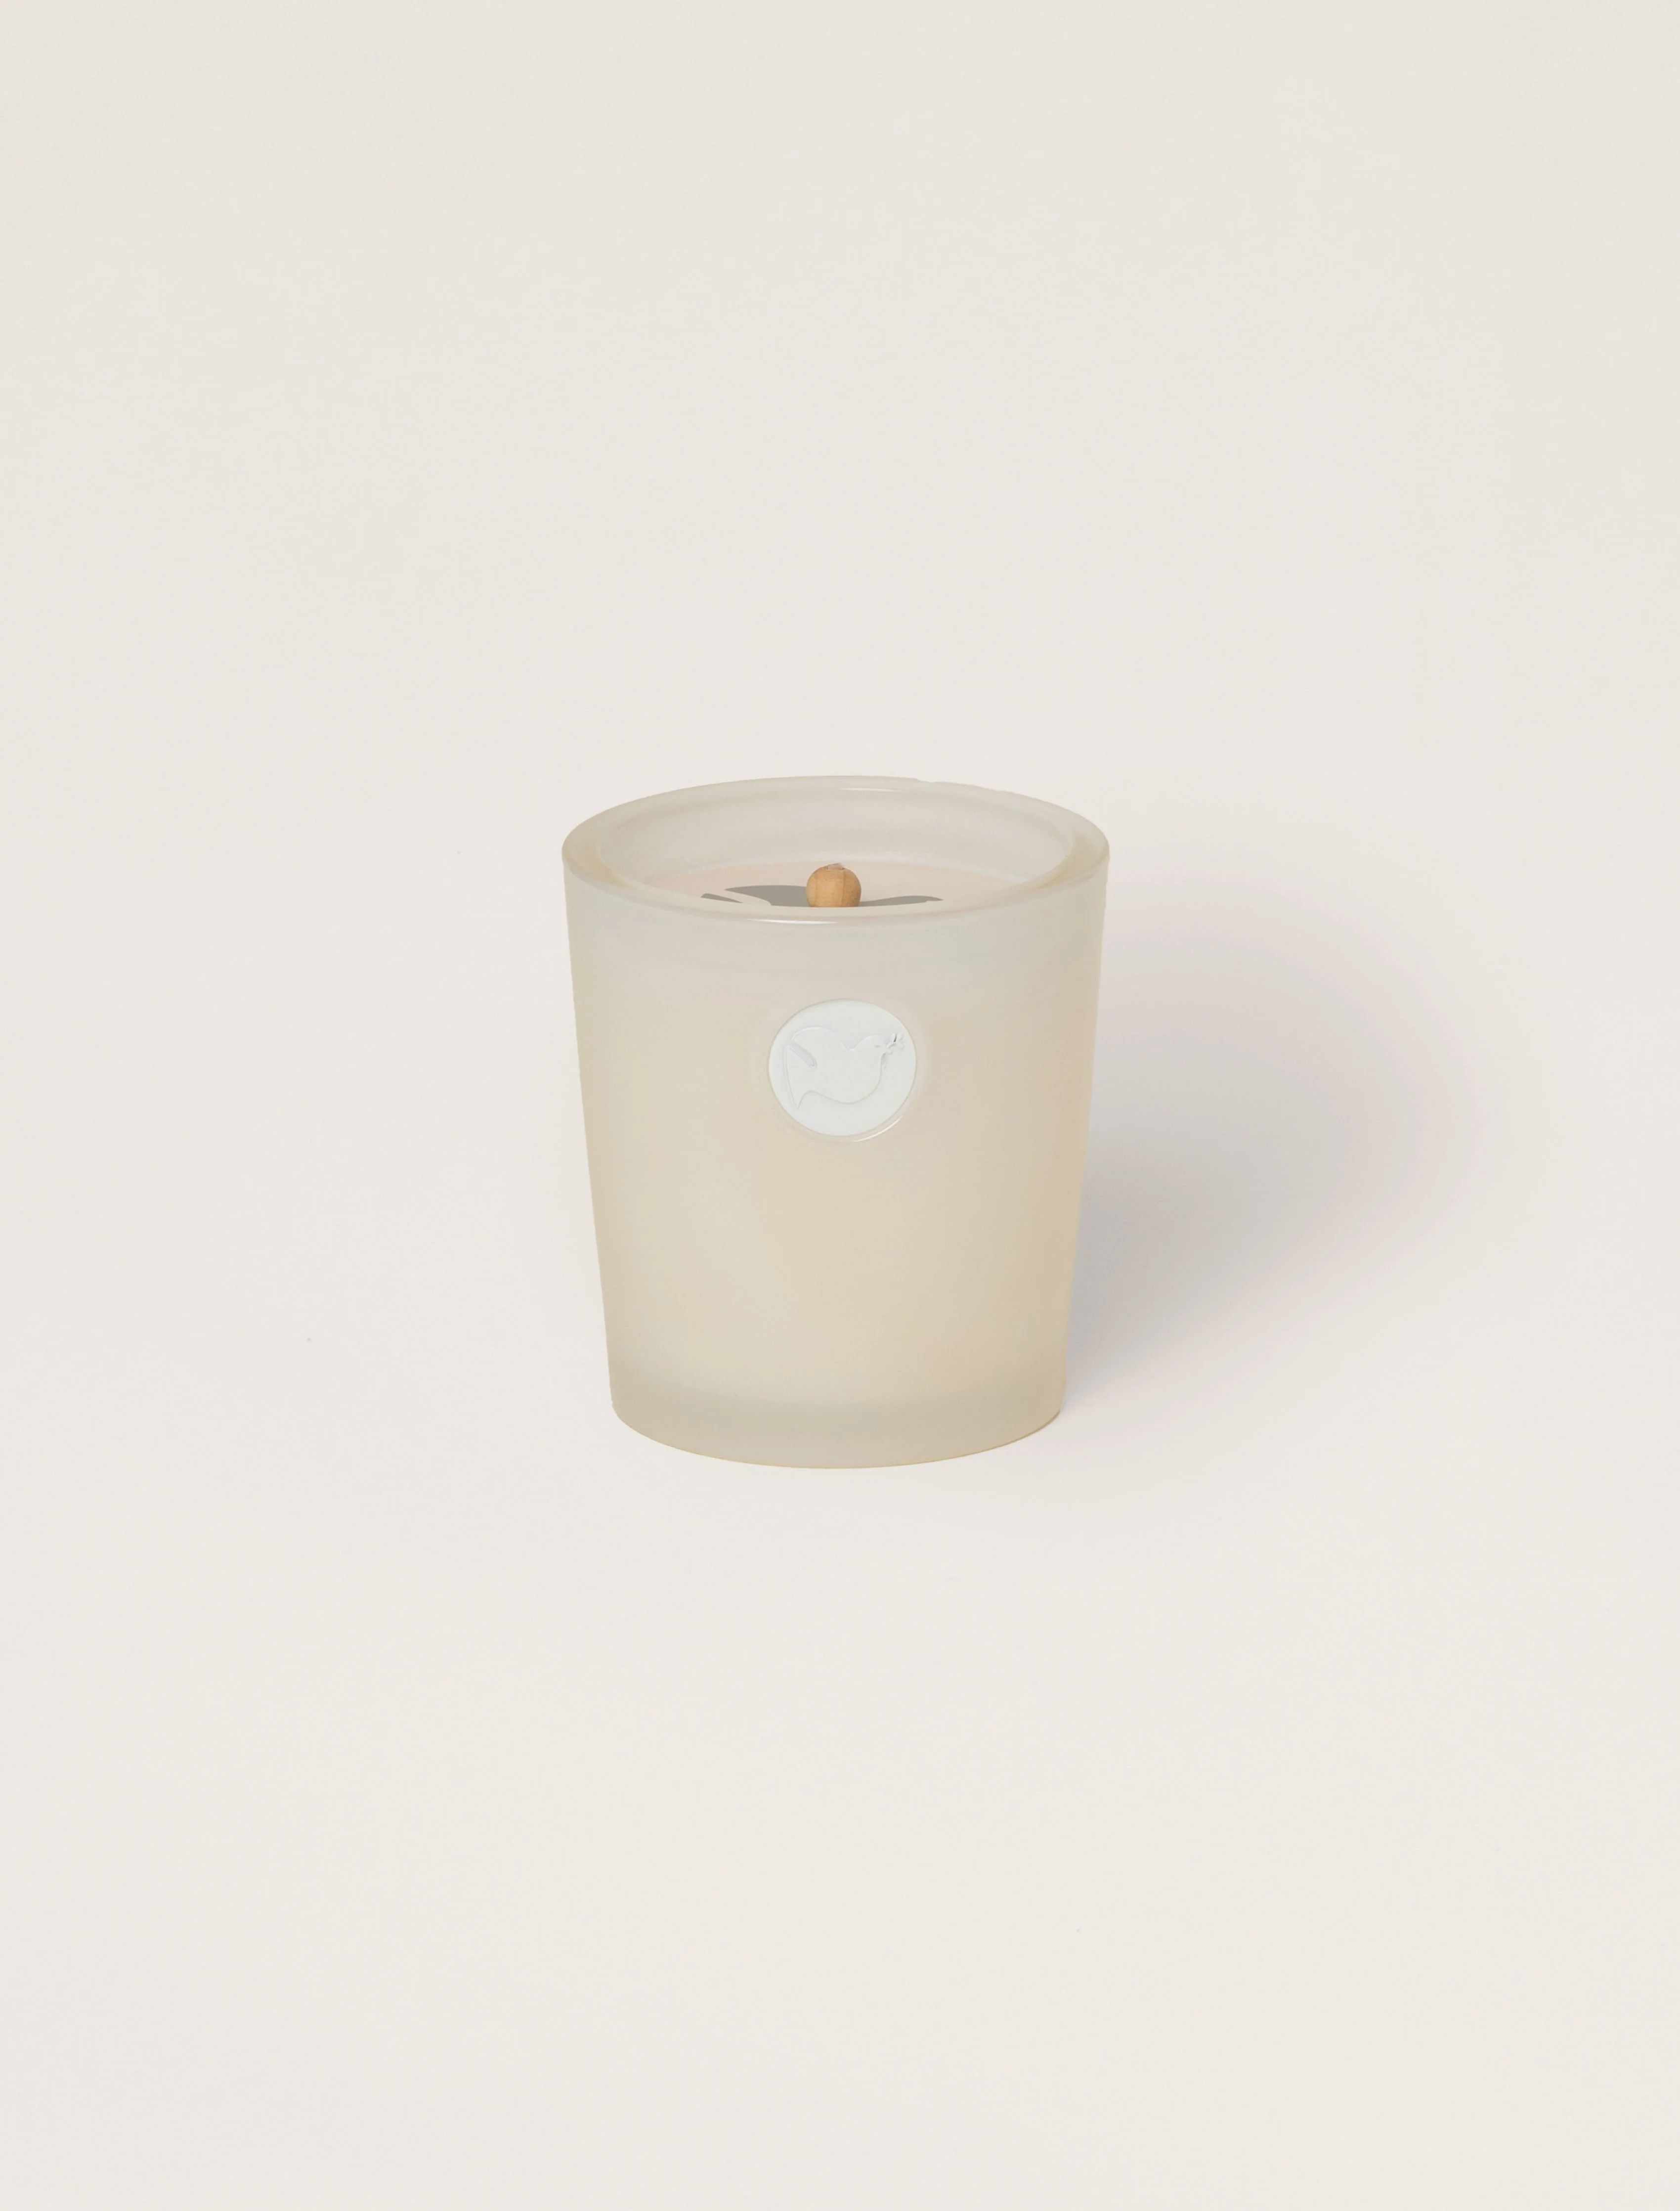 30th Anniversary Covered in Prayer® Luxe Soy Candle | Barefoot Dreams